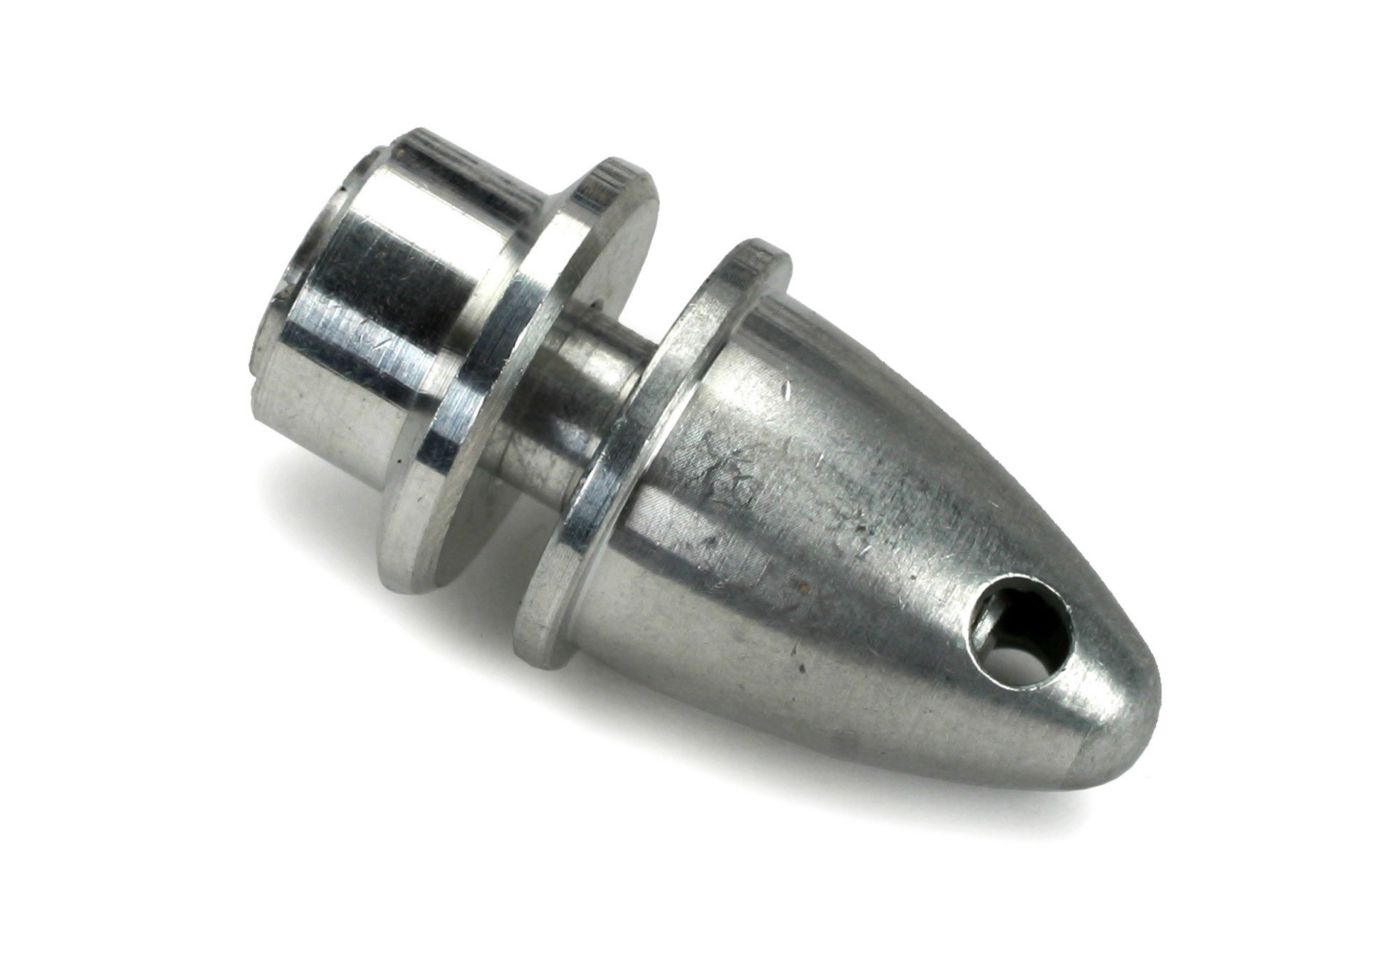 E-flite Propeller Adapter with Collet, 4mm (EFLM1924)